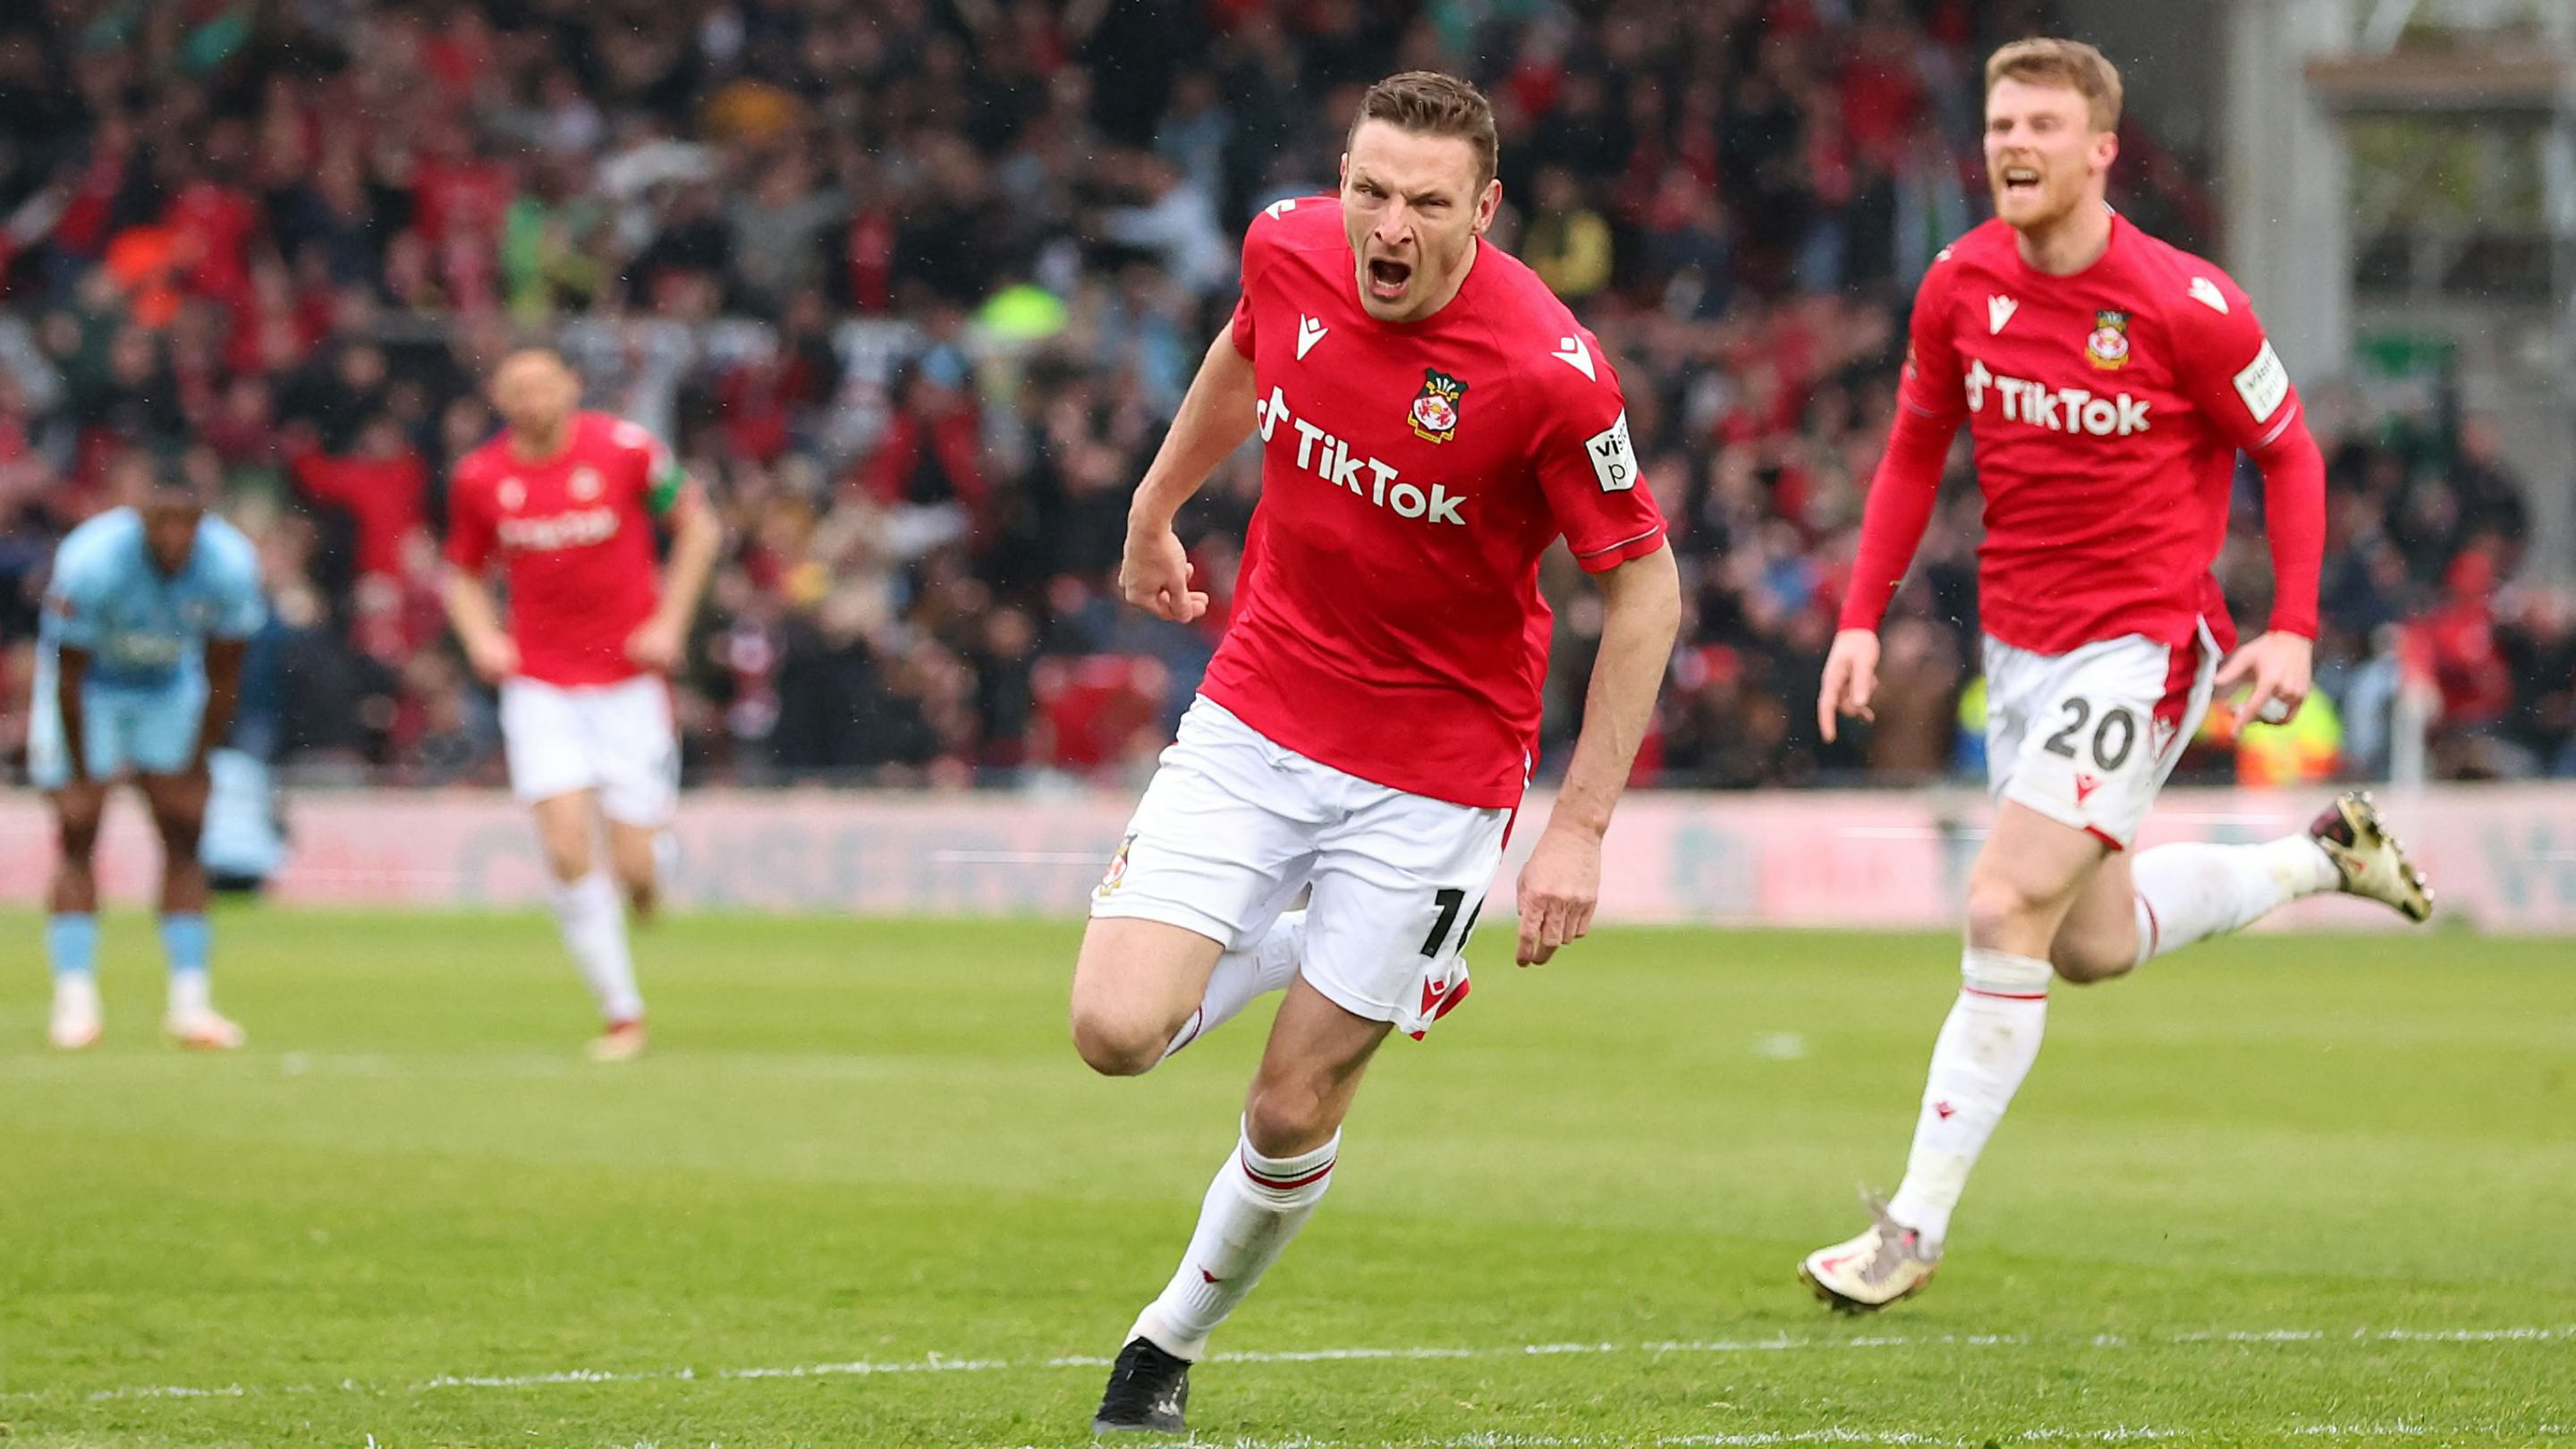 Wrexham 3-1 Boreham Wood: Red Dragons secure promotion to League Two